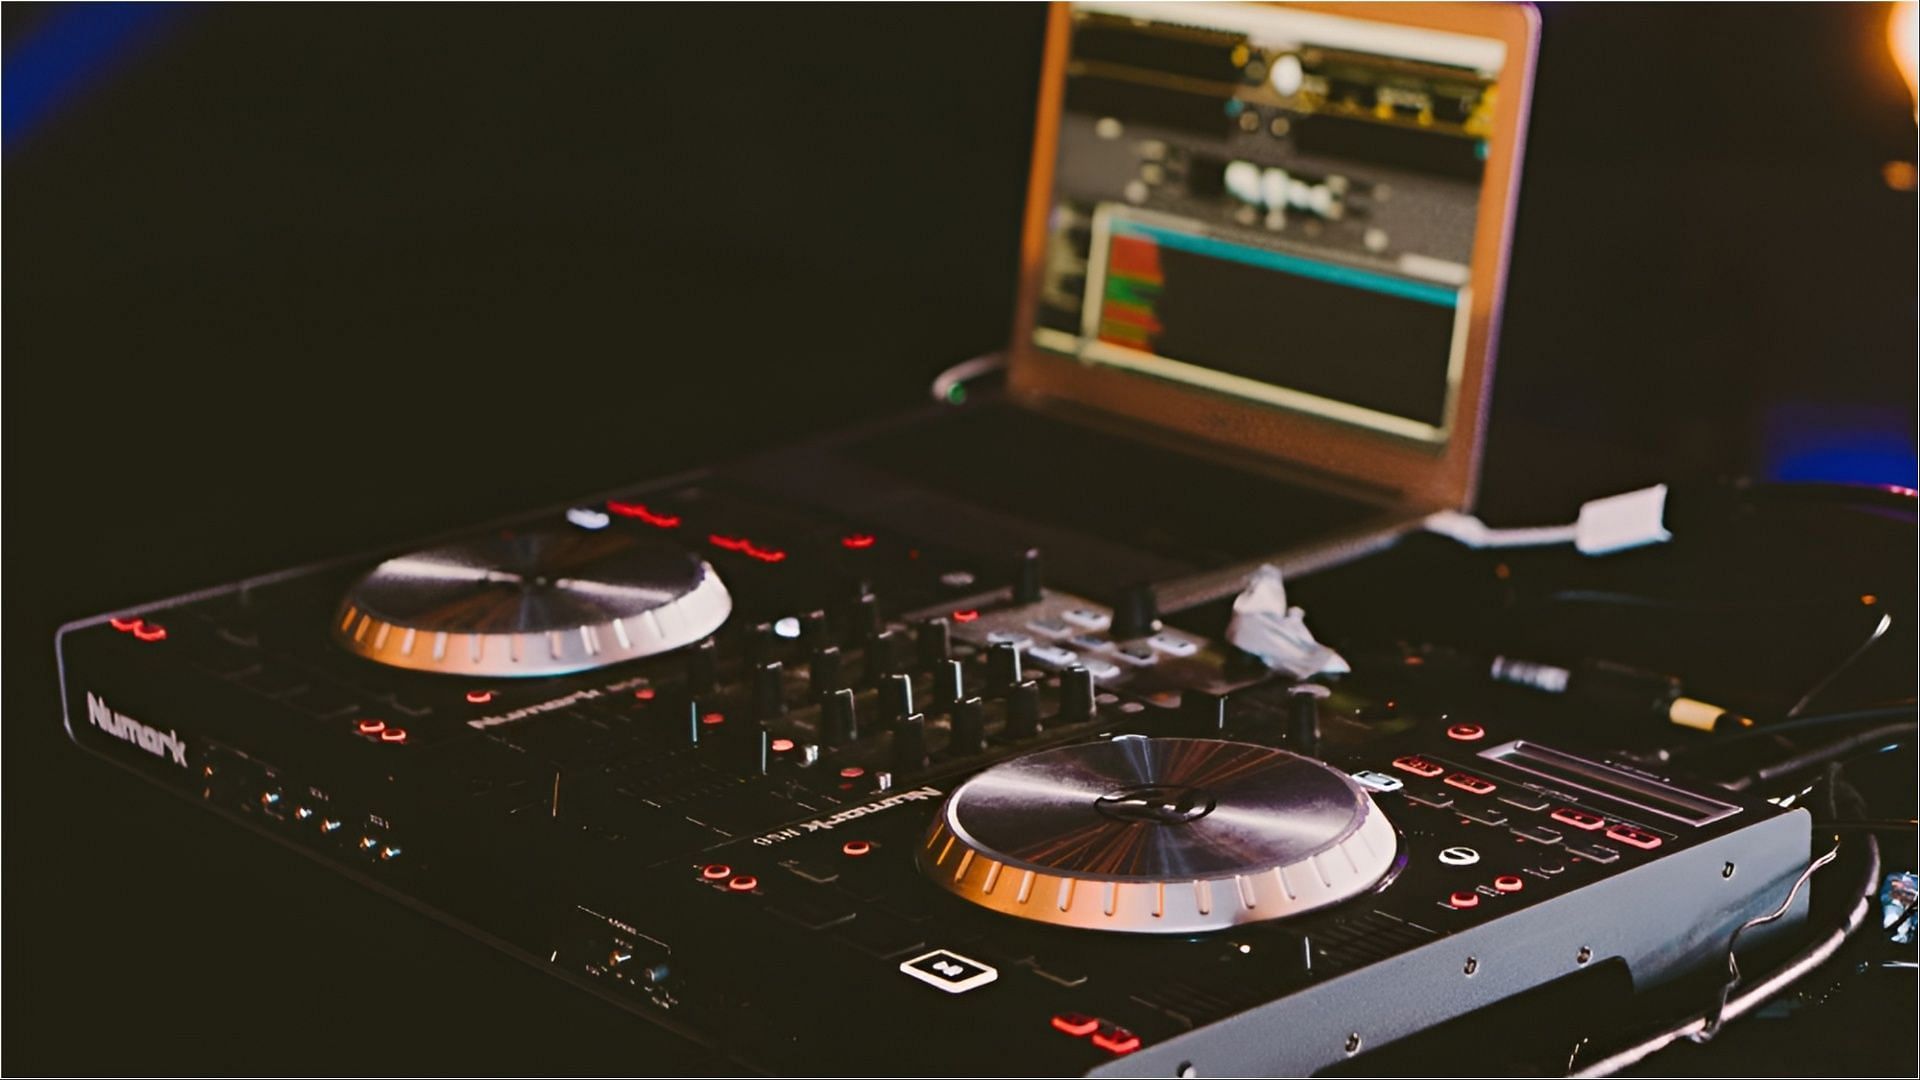 A Georgia-based DJ was recently found dead inside his residence along with his wife (Representative image via Unsplash)